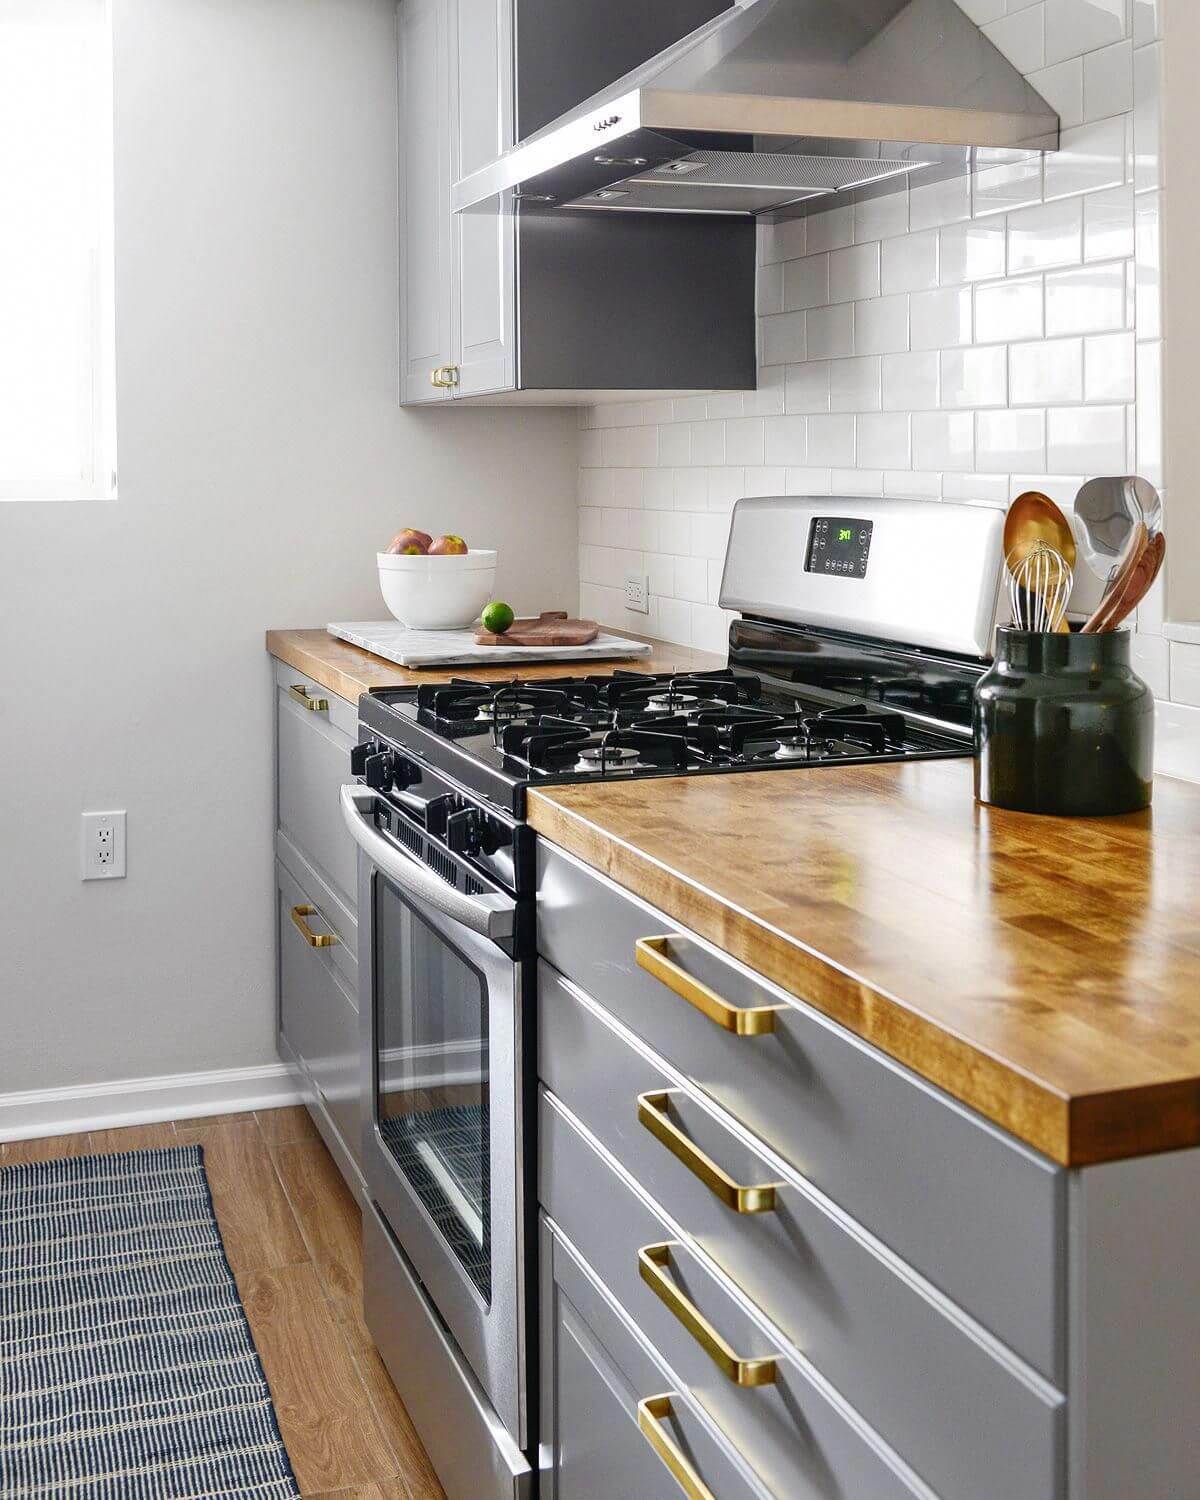 Wooden Counters and Stainless Steel Storage